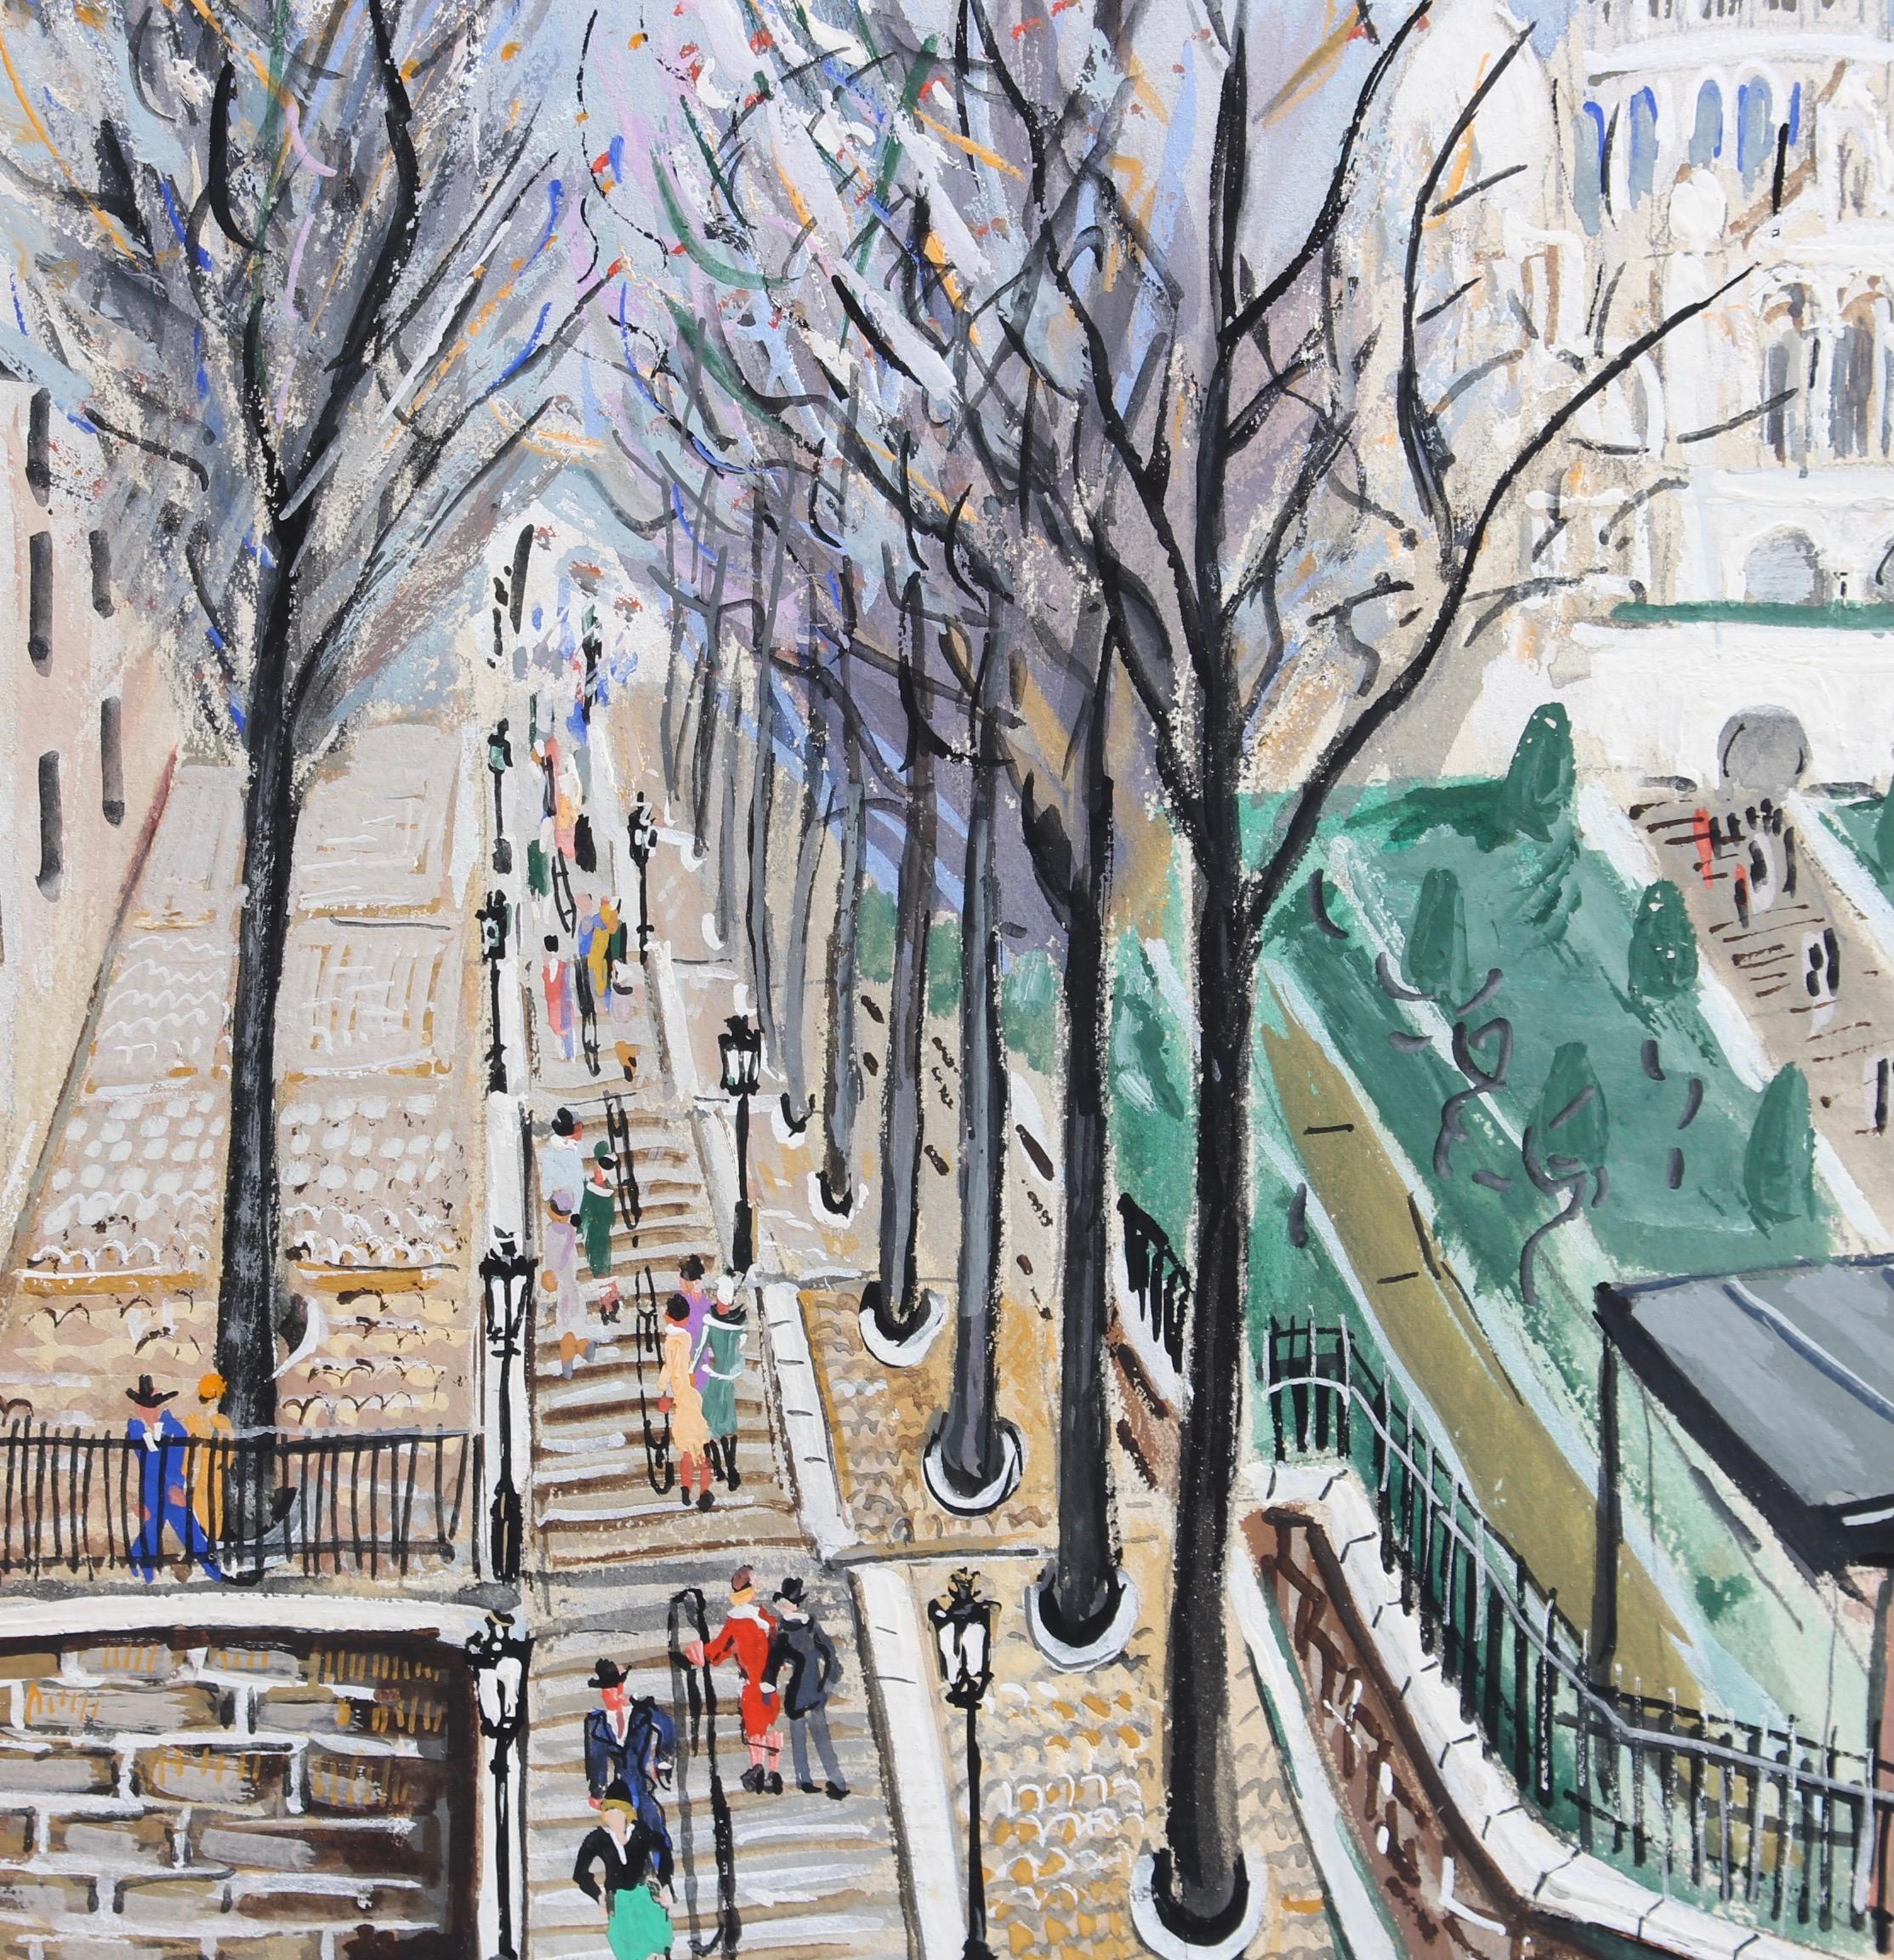 'Sacré-Coeur, Montmartre at Willette Square, Paris', gouache on art paper (circa 1930s), by Lucien Génin. Created by the Director of Public Ways and Promenades under Napoleon III, Square Willette is a large garden on the slopes of the Butte